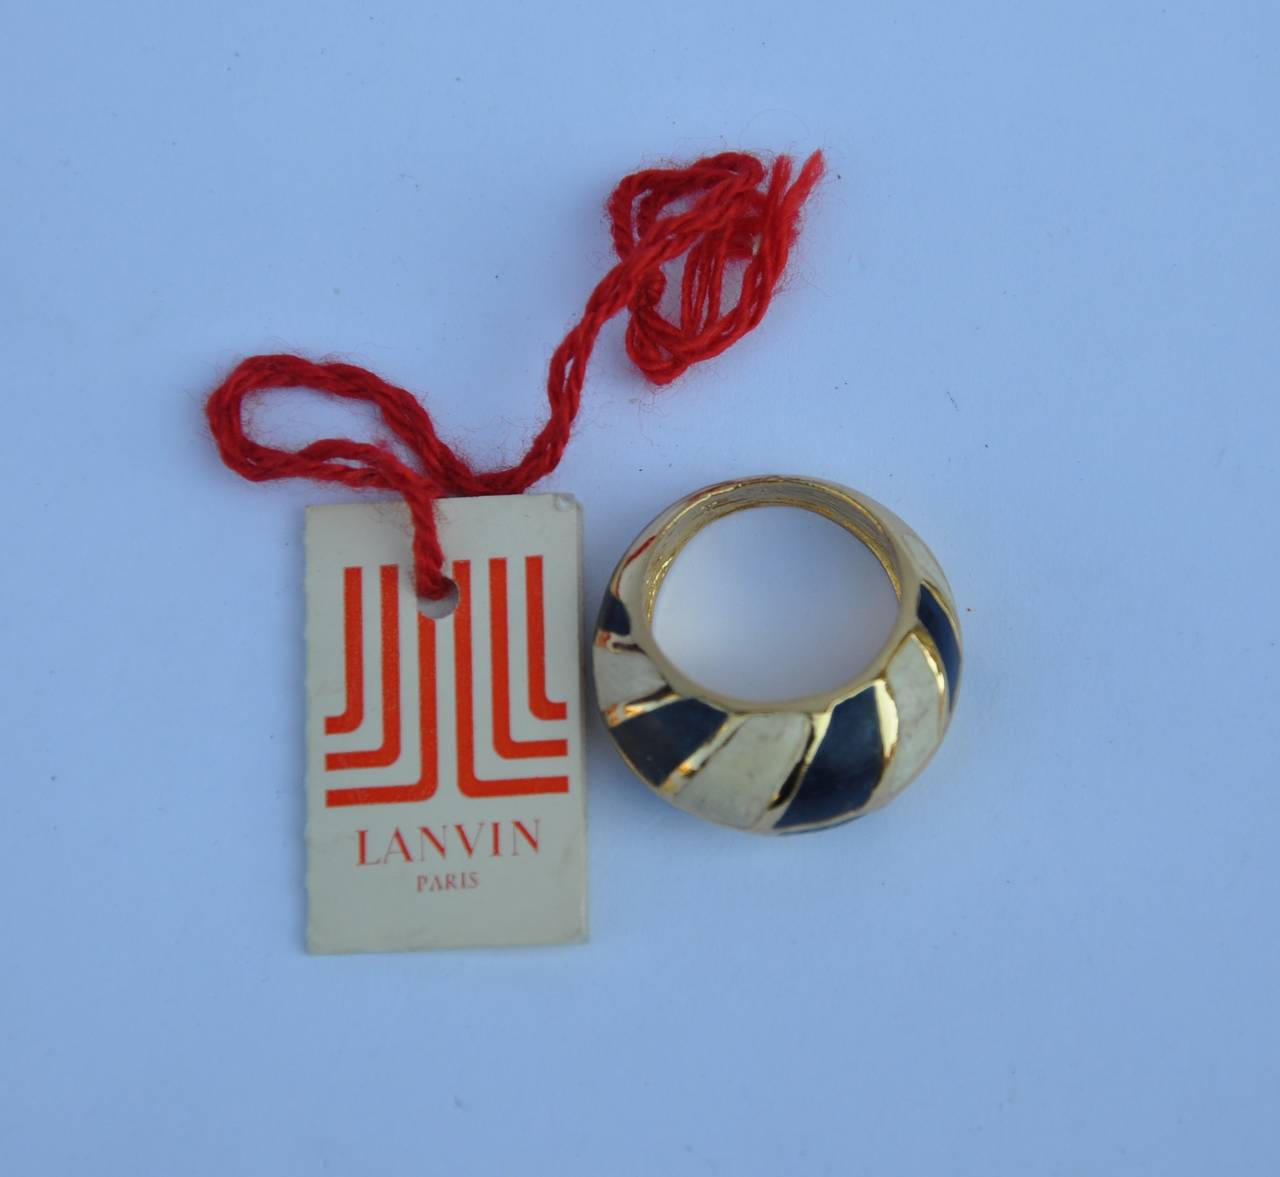 Lanvin's wonderful combination of navy with cream enamel finish over gold vermeil finish ring is size 7 1/2". Original tags attached. The depth measures 5/16.